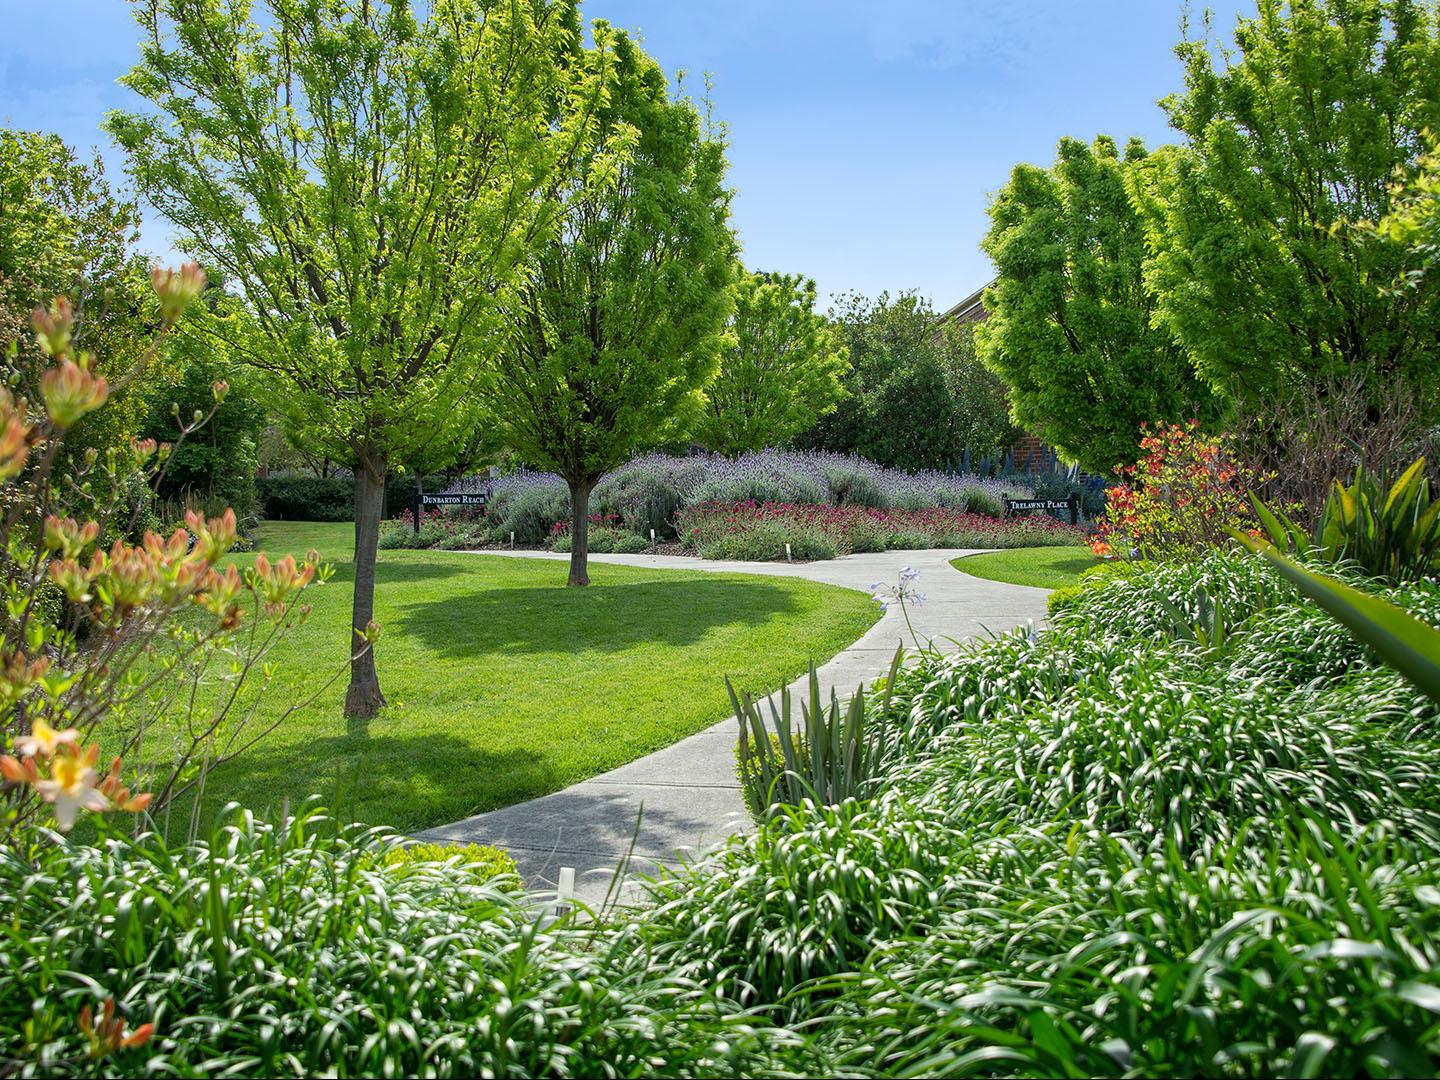 Lush green garden with small shrubs, large trees and a concrete path winding through the middle